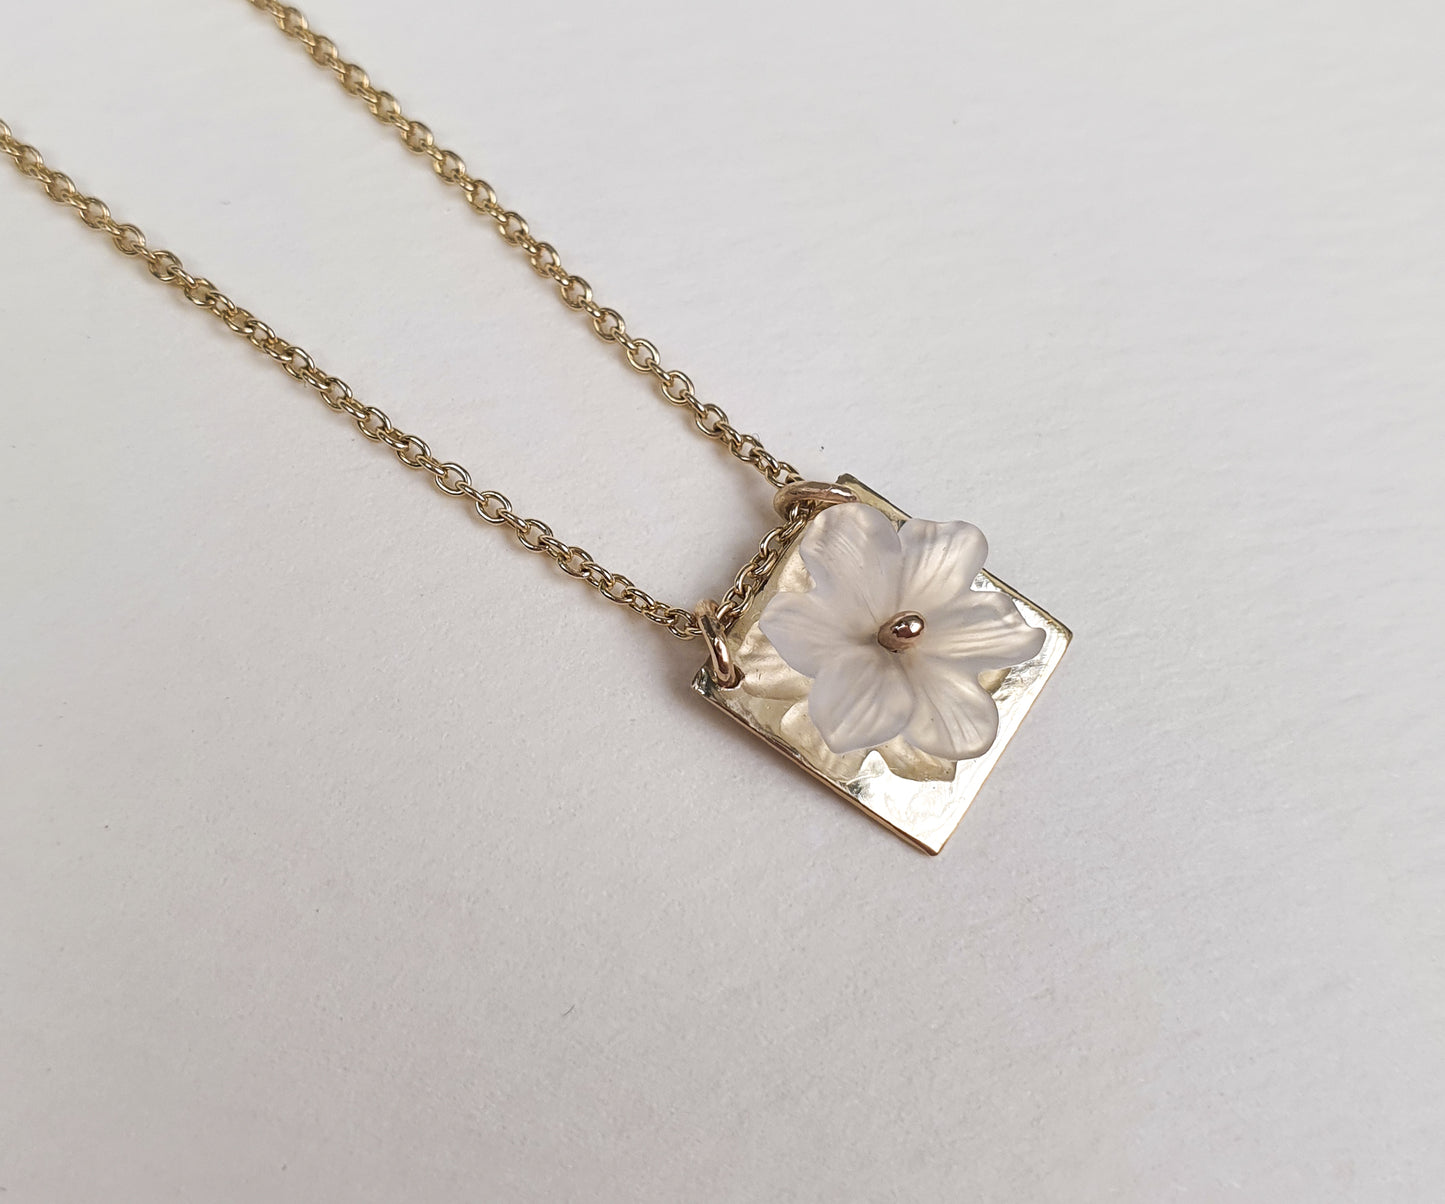 Rock Crystal Flower Necklace in Solid Gold